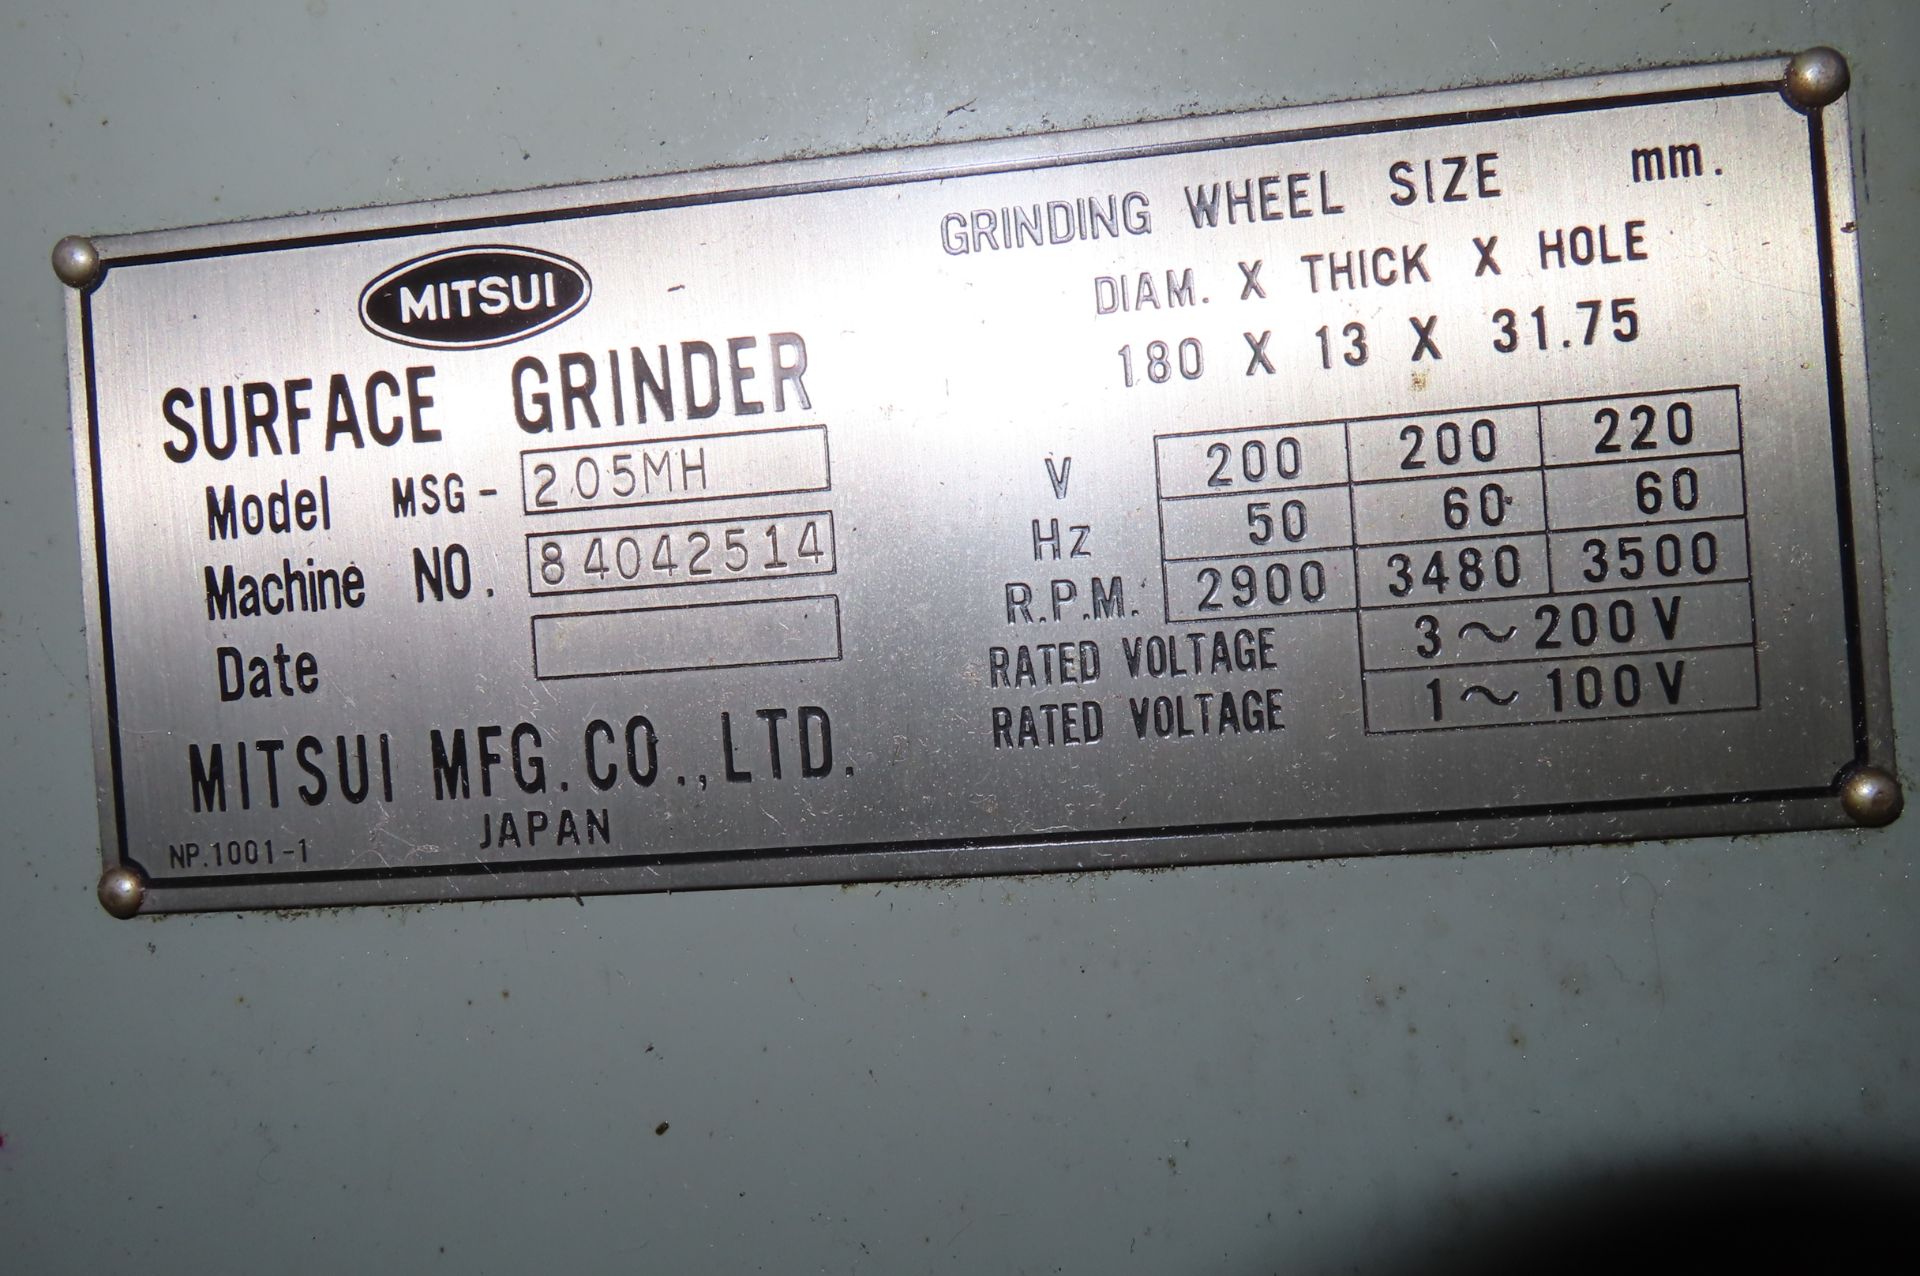 MITSUI 205MH HANDFEED SURFACE GRINDER, S/N 84042514… - Image 5 of 5